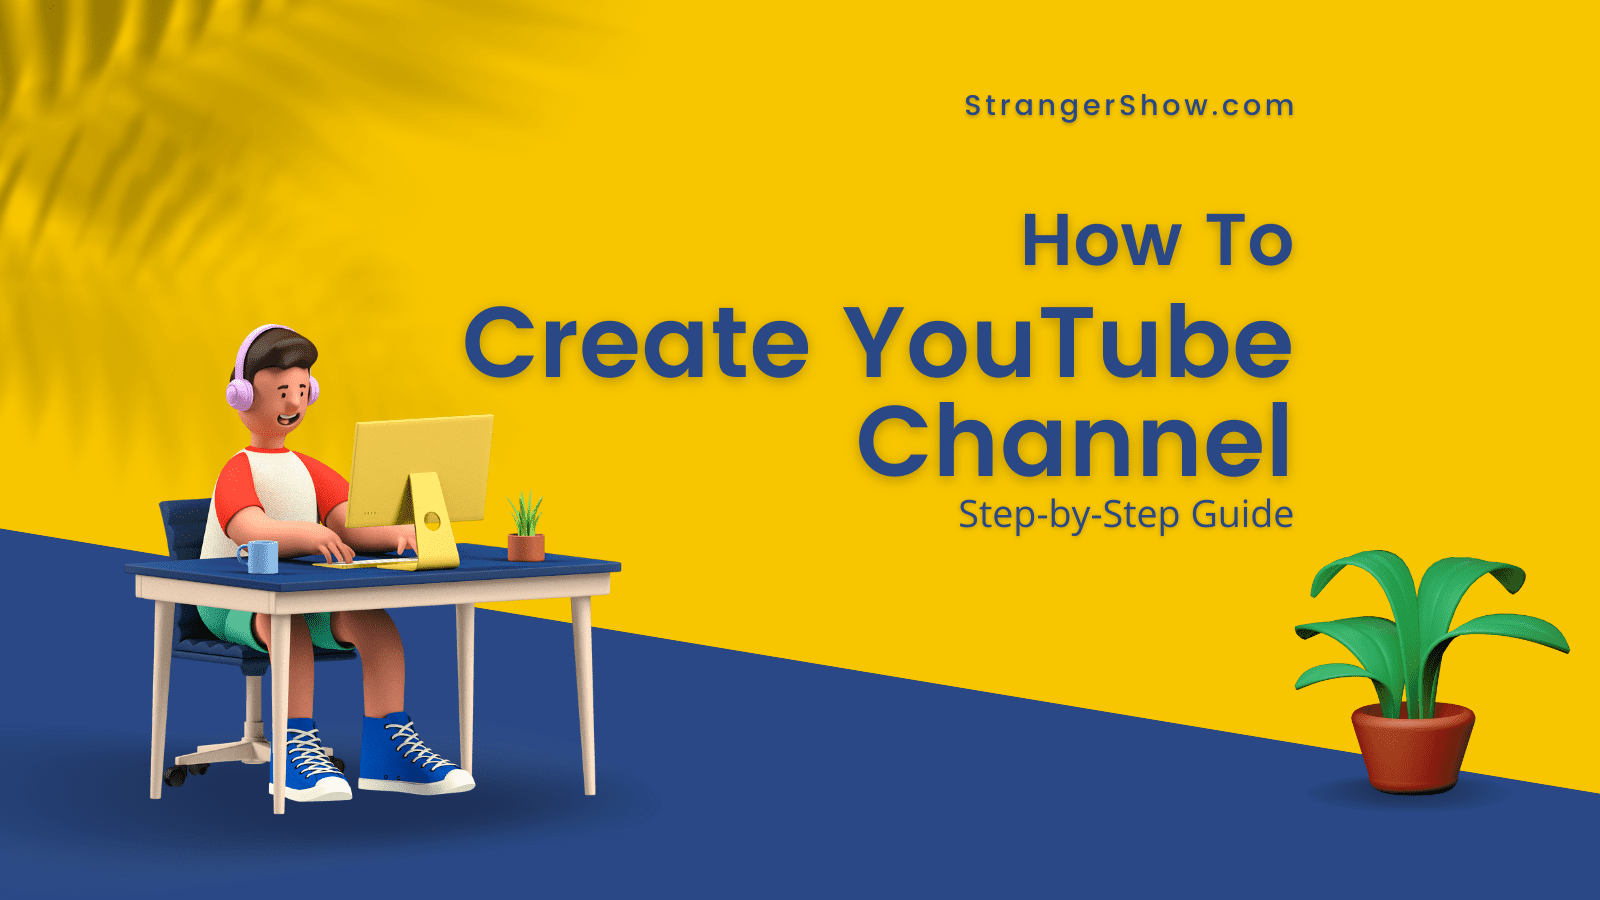 How to create YouTube Channel Step by Step Guide